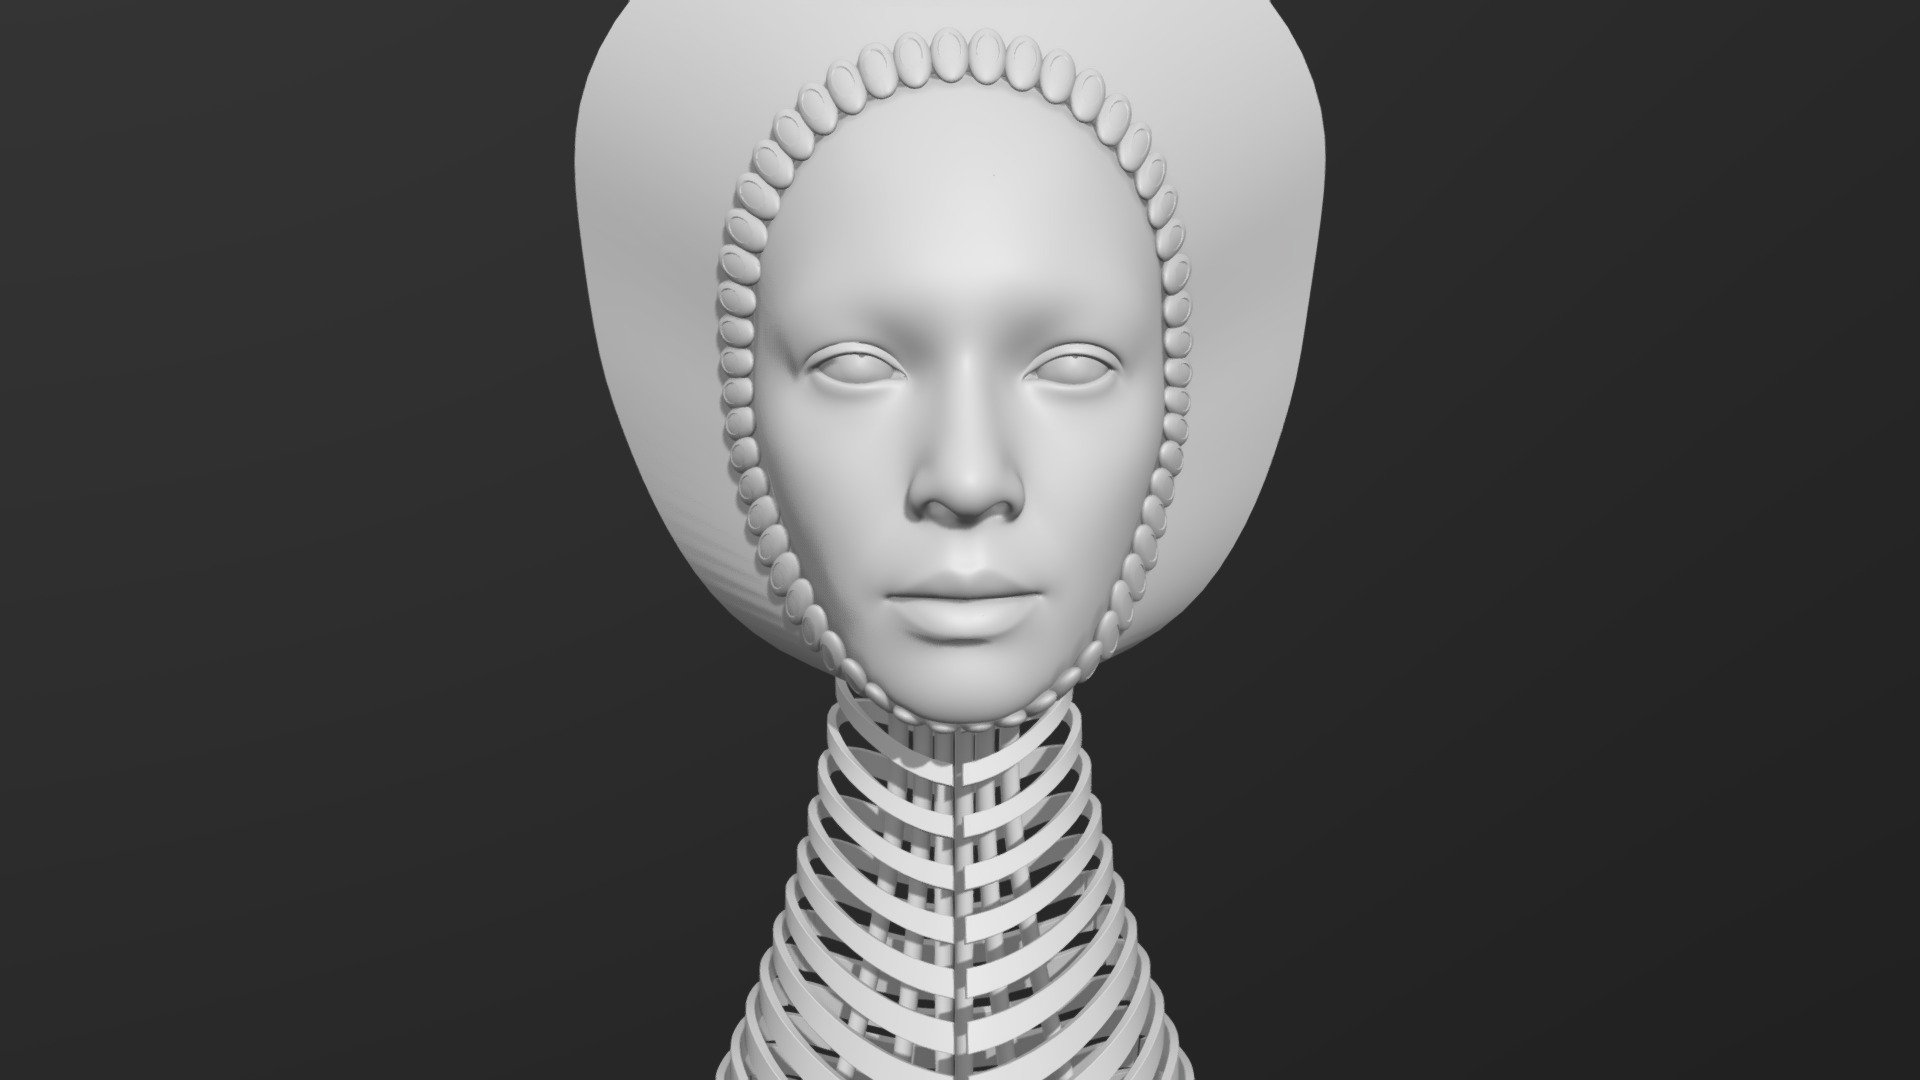 This cyber headdress was made for one of our meditation Kiki Yago experiences. It uses a smooth hard surface form in conjunction with jewelry and tribal elements to achieve a unique stunning look.

This model has even non-overlapping UVs and a clean mesh topology.

The model is split into logical parts with sensible names.

The original Blender file with a studio lighting setup is included 3d model